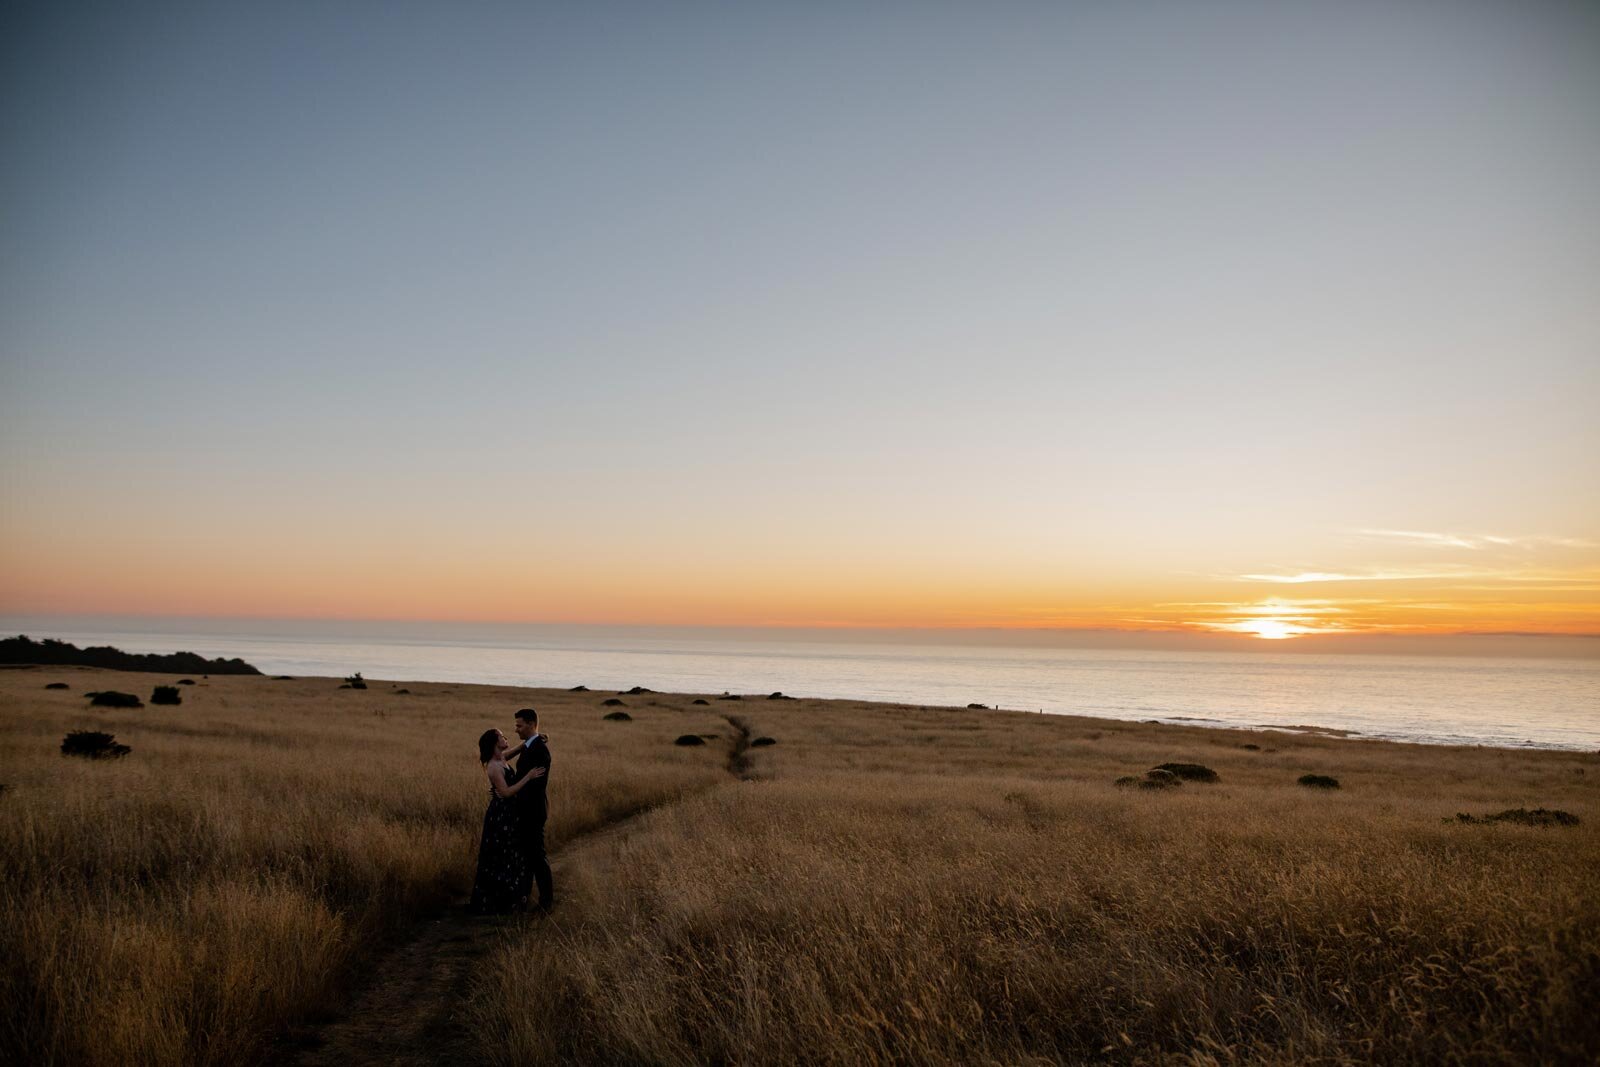 Newlywed couple embracing in grassy field before the sun setting into the ocean in Mendocino CA Carly Romeo